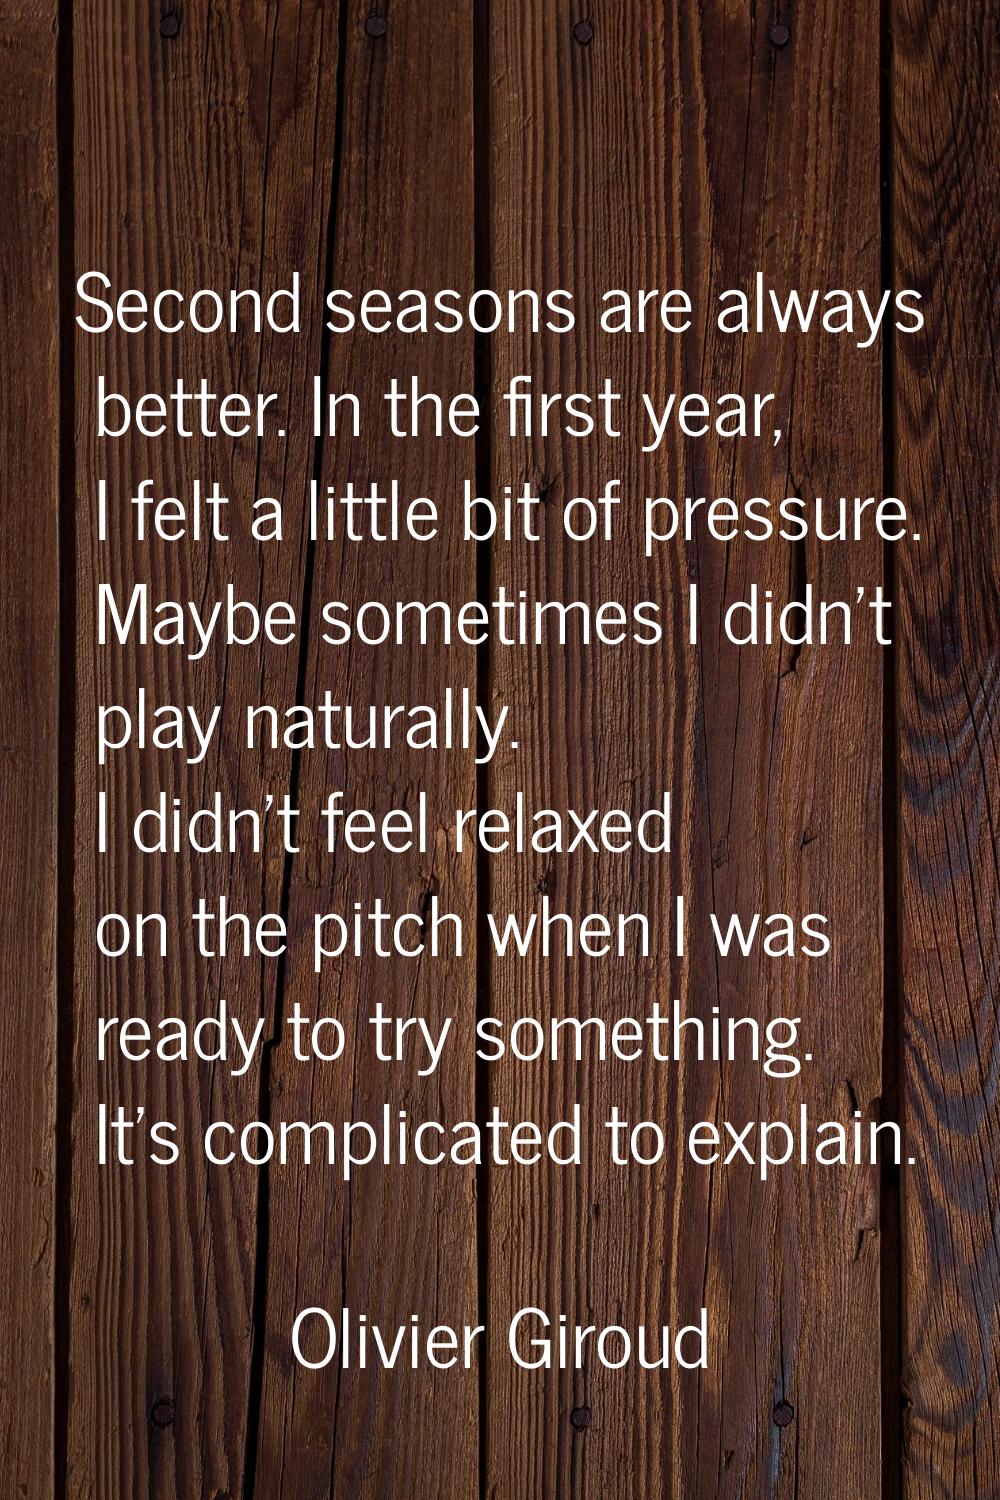 Second seasons are always better. In the first year, I felt a little bit of pressure. Maybe sometim